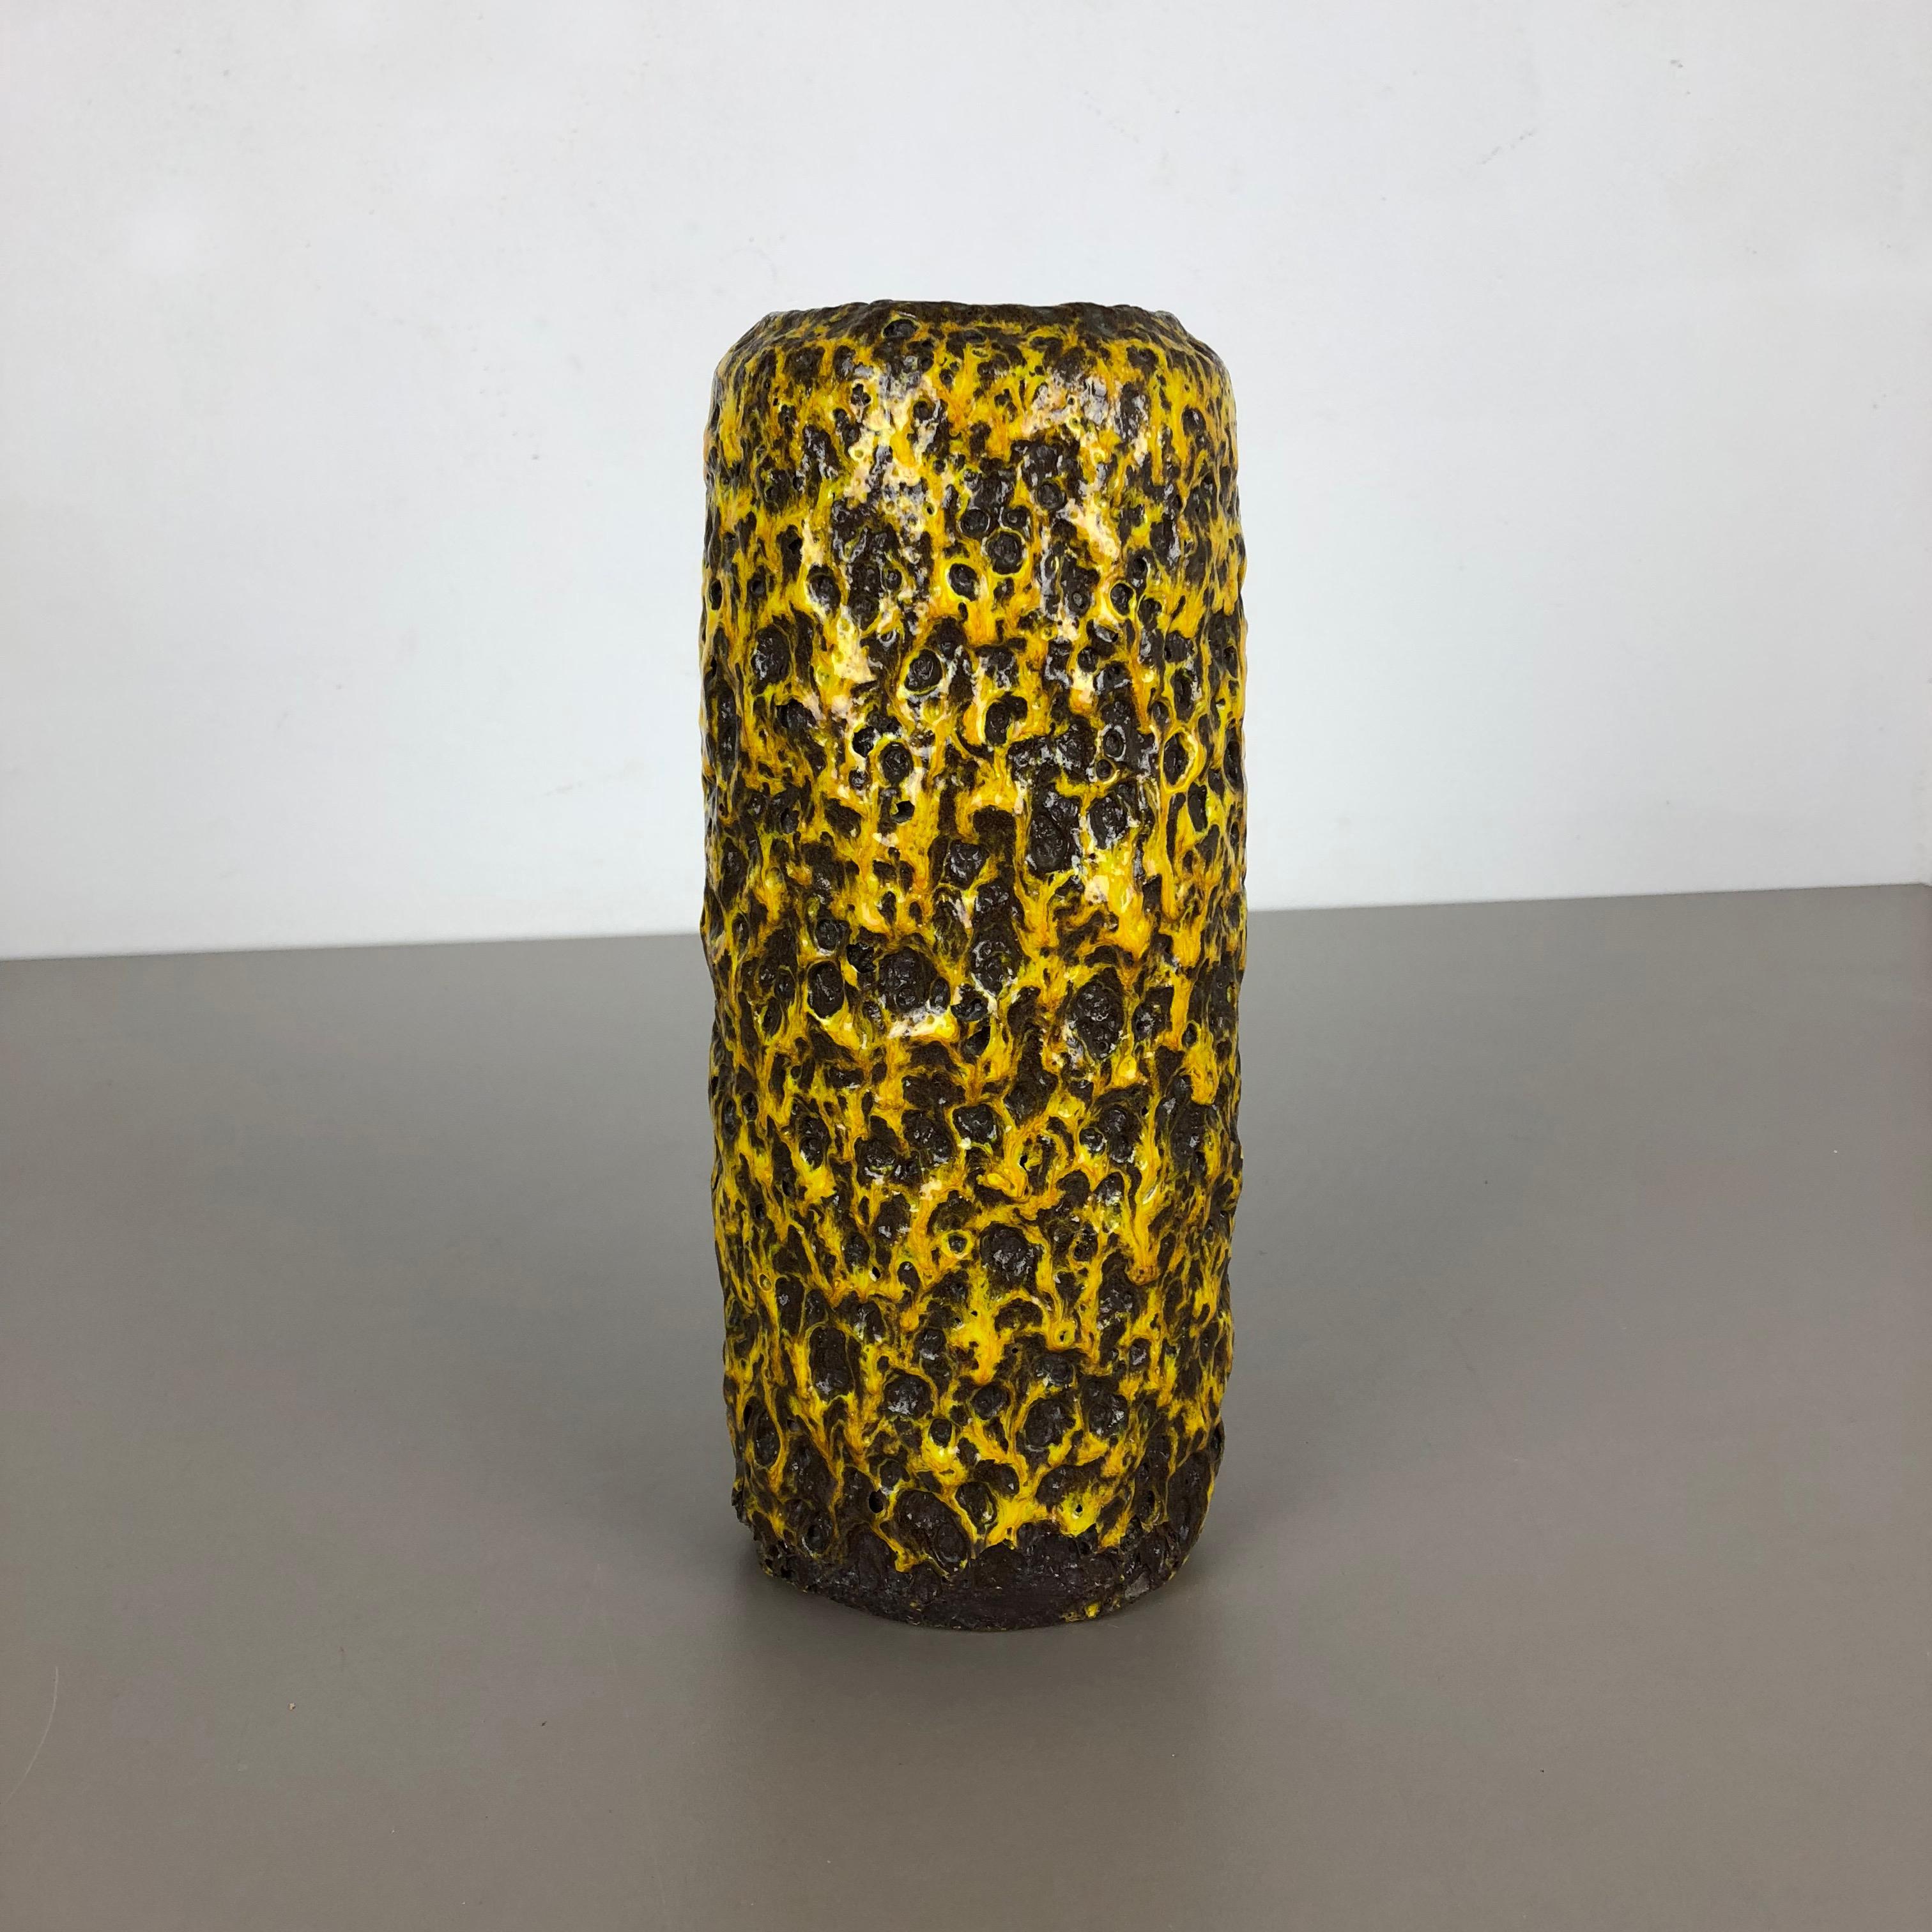 Article:

Fat lava art vase, heavy brutalist glaze


Producer:

Scheurich, Germany



Decade:

1970s




This original vintage vase was produced in the 1970s in Germany. It is made of ceramic pottery in fat lava optic with abstract